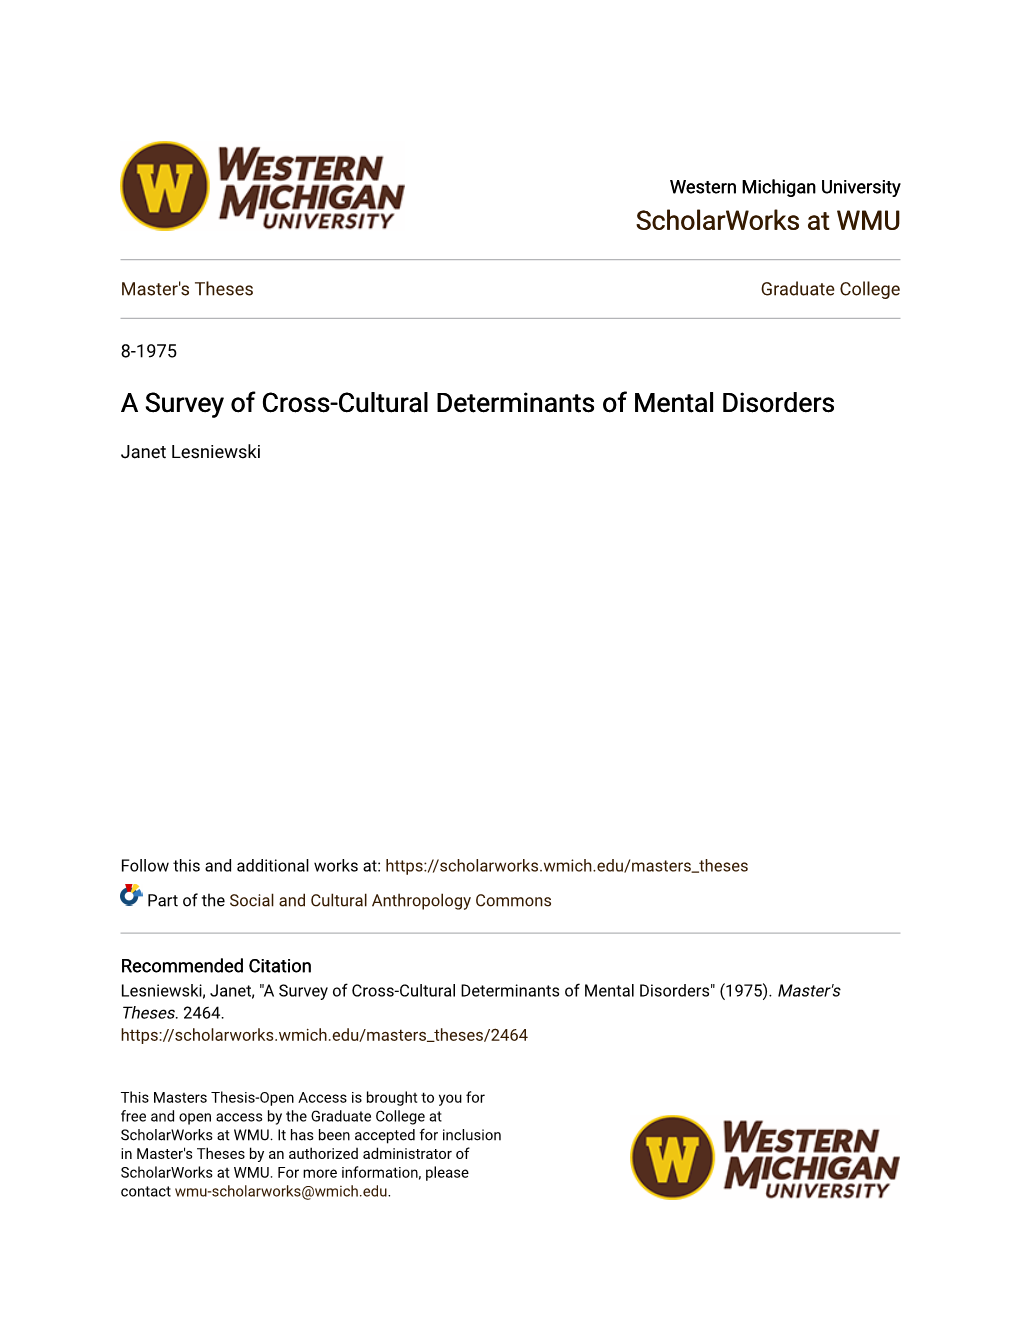 A Survey of Cross-Cultural Determinants of Mental Disorders